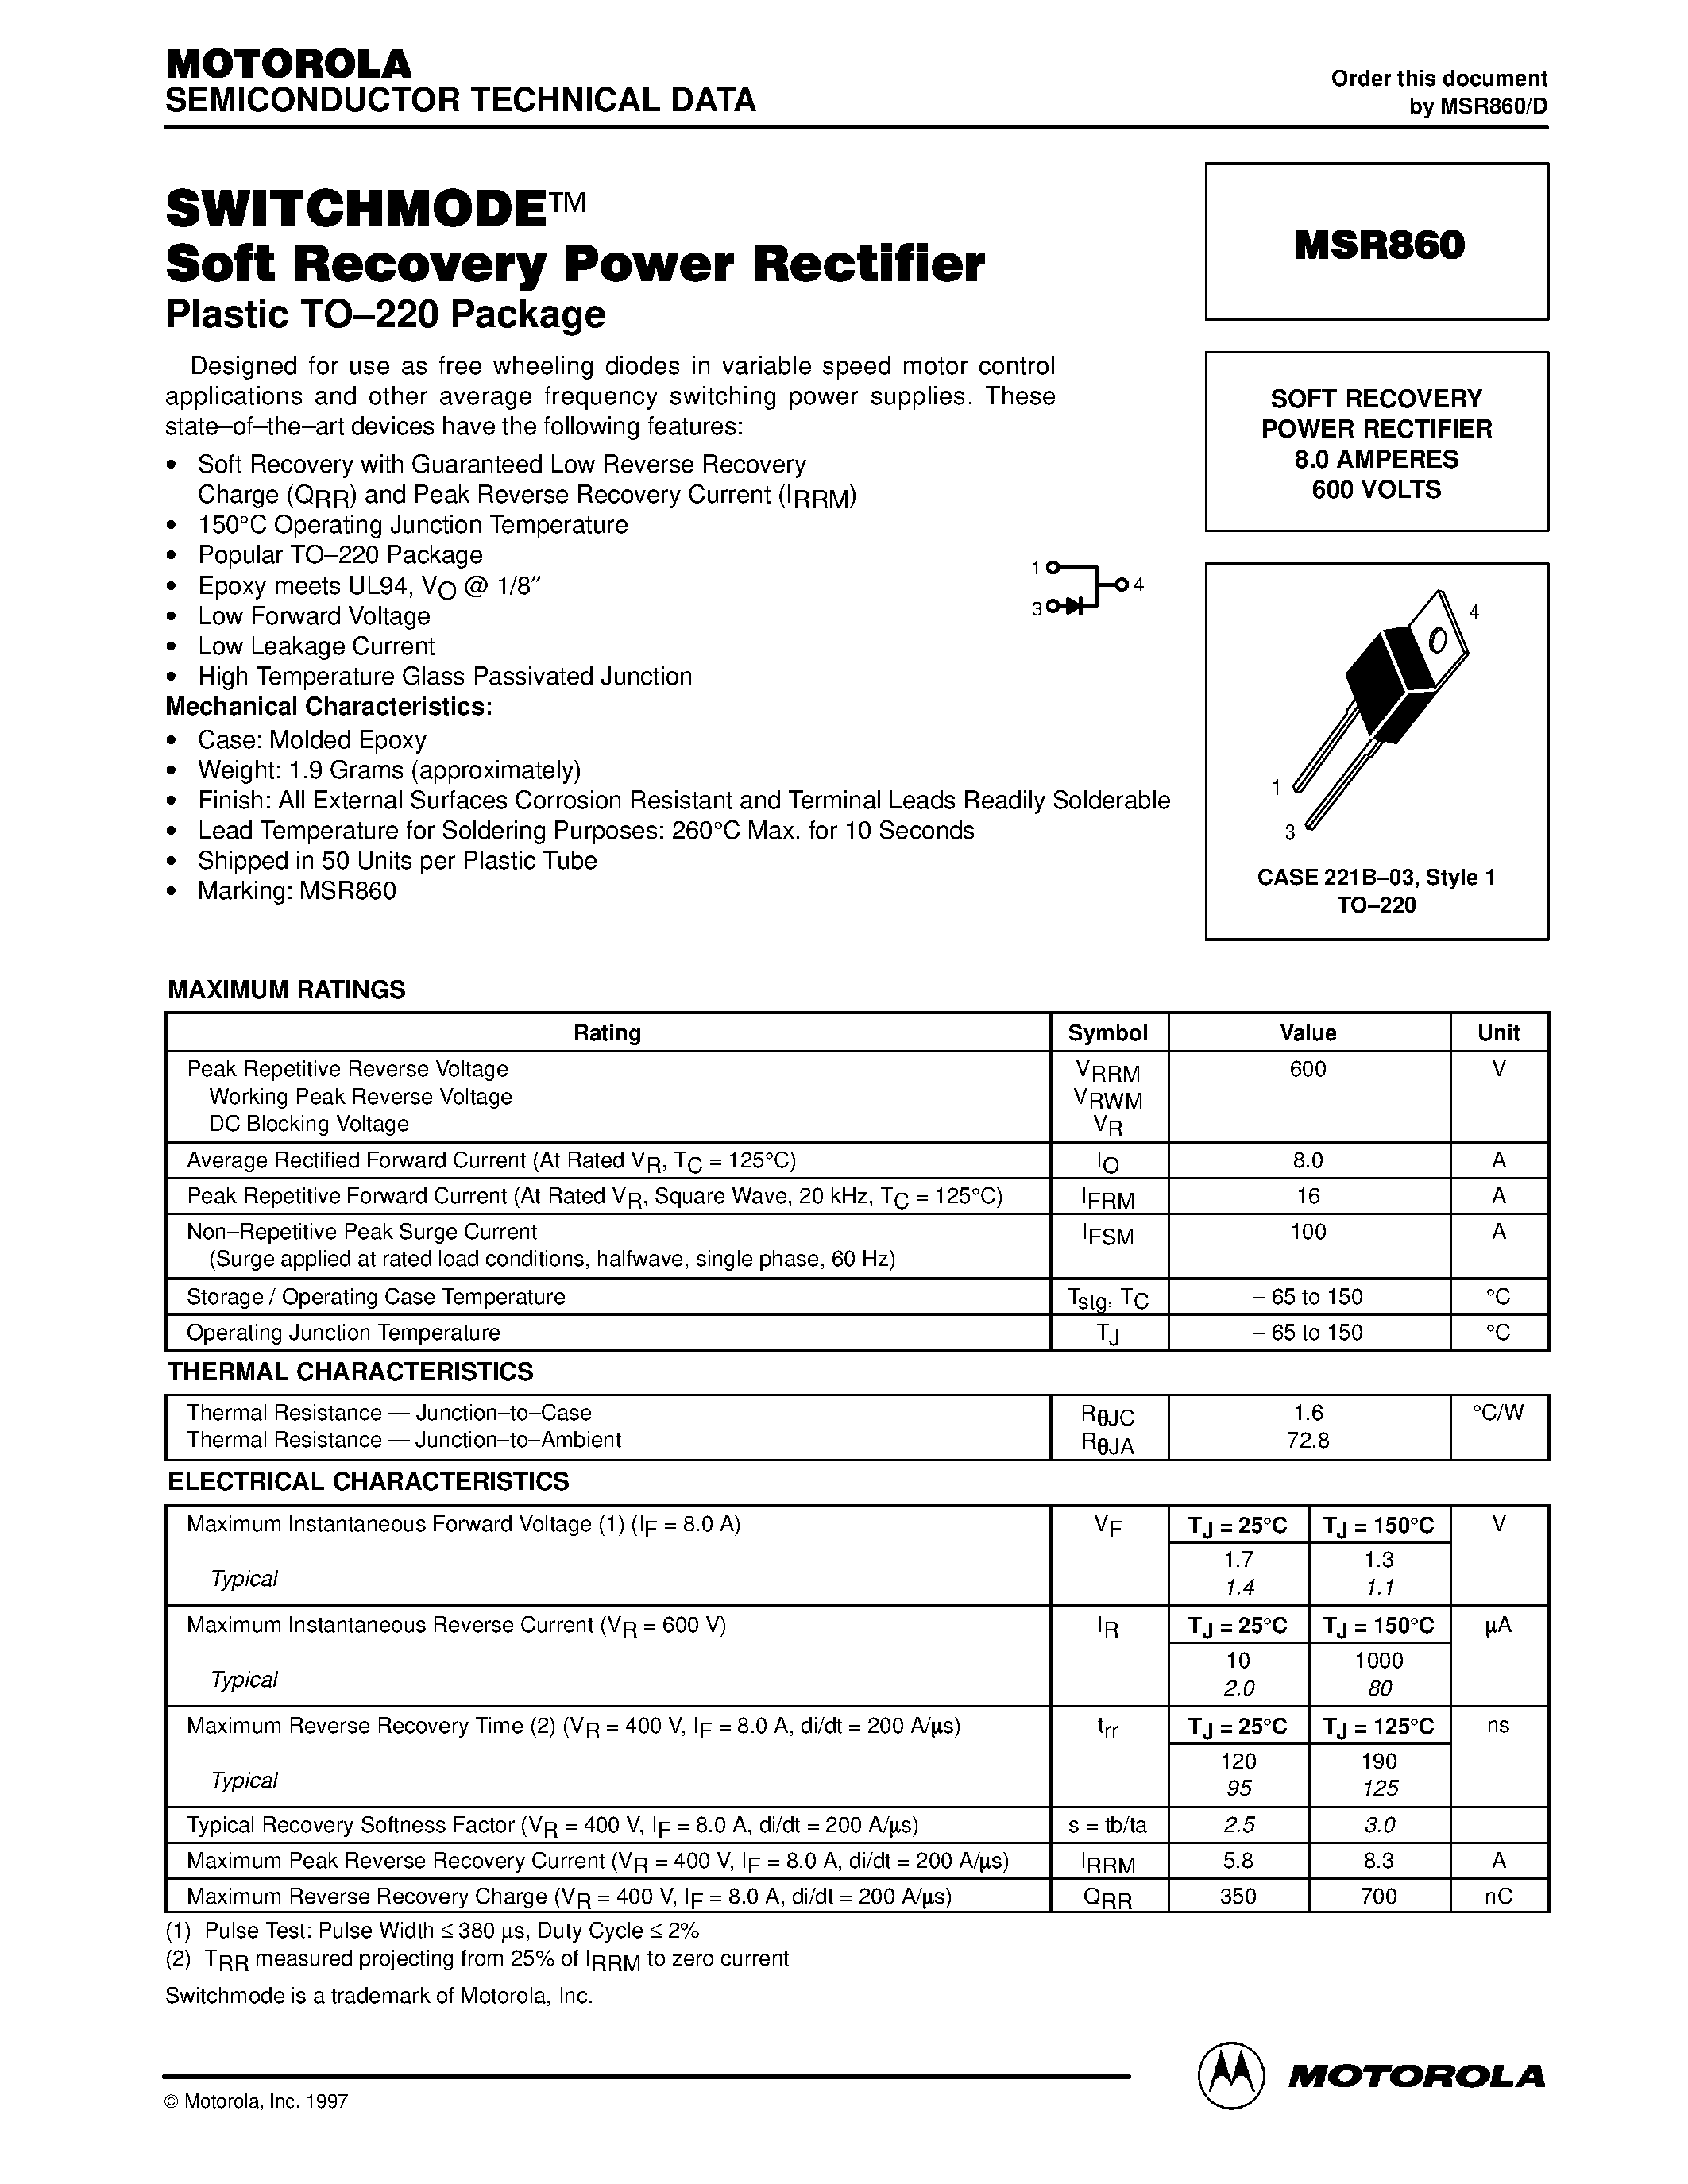 Даташит MSR860 - SOFT RECOVERY POWER RECTIFIER 8.0 AMPERES 600 VOLTS страница 1